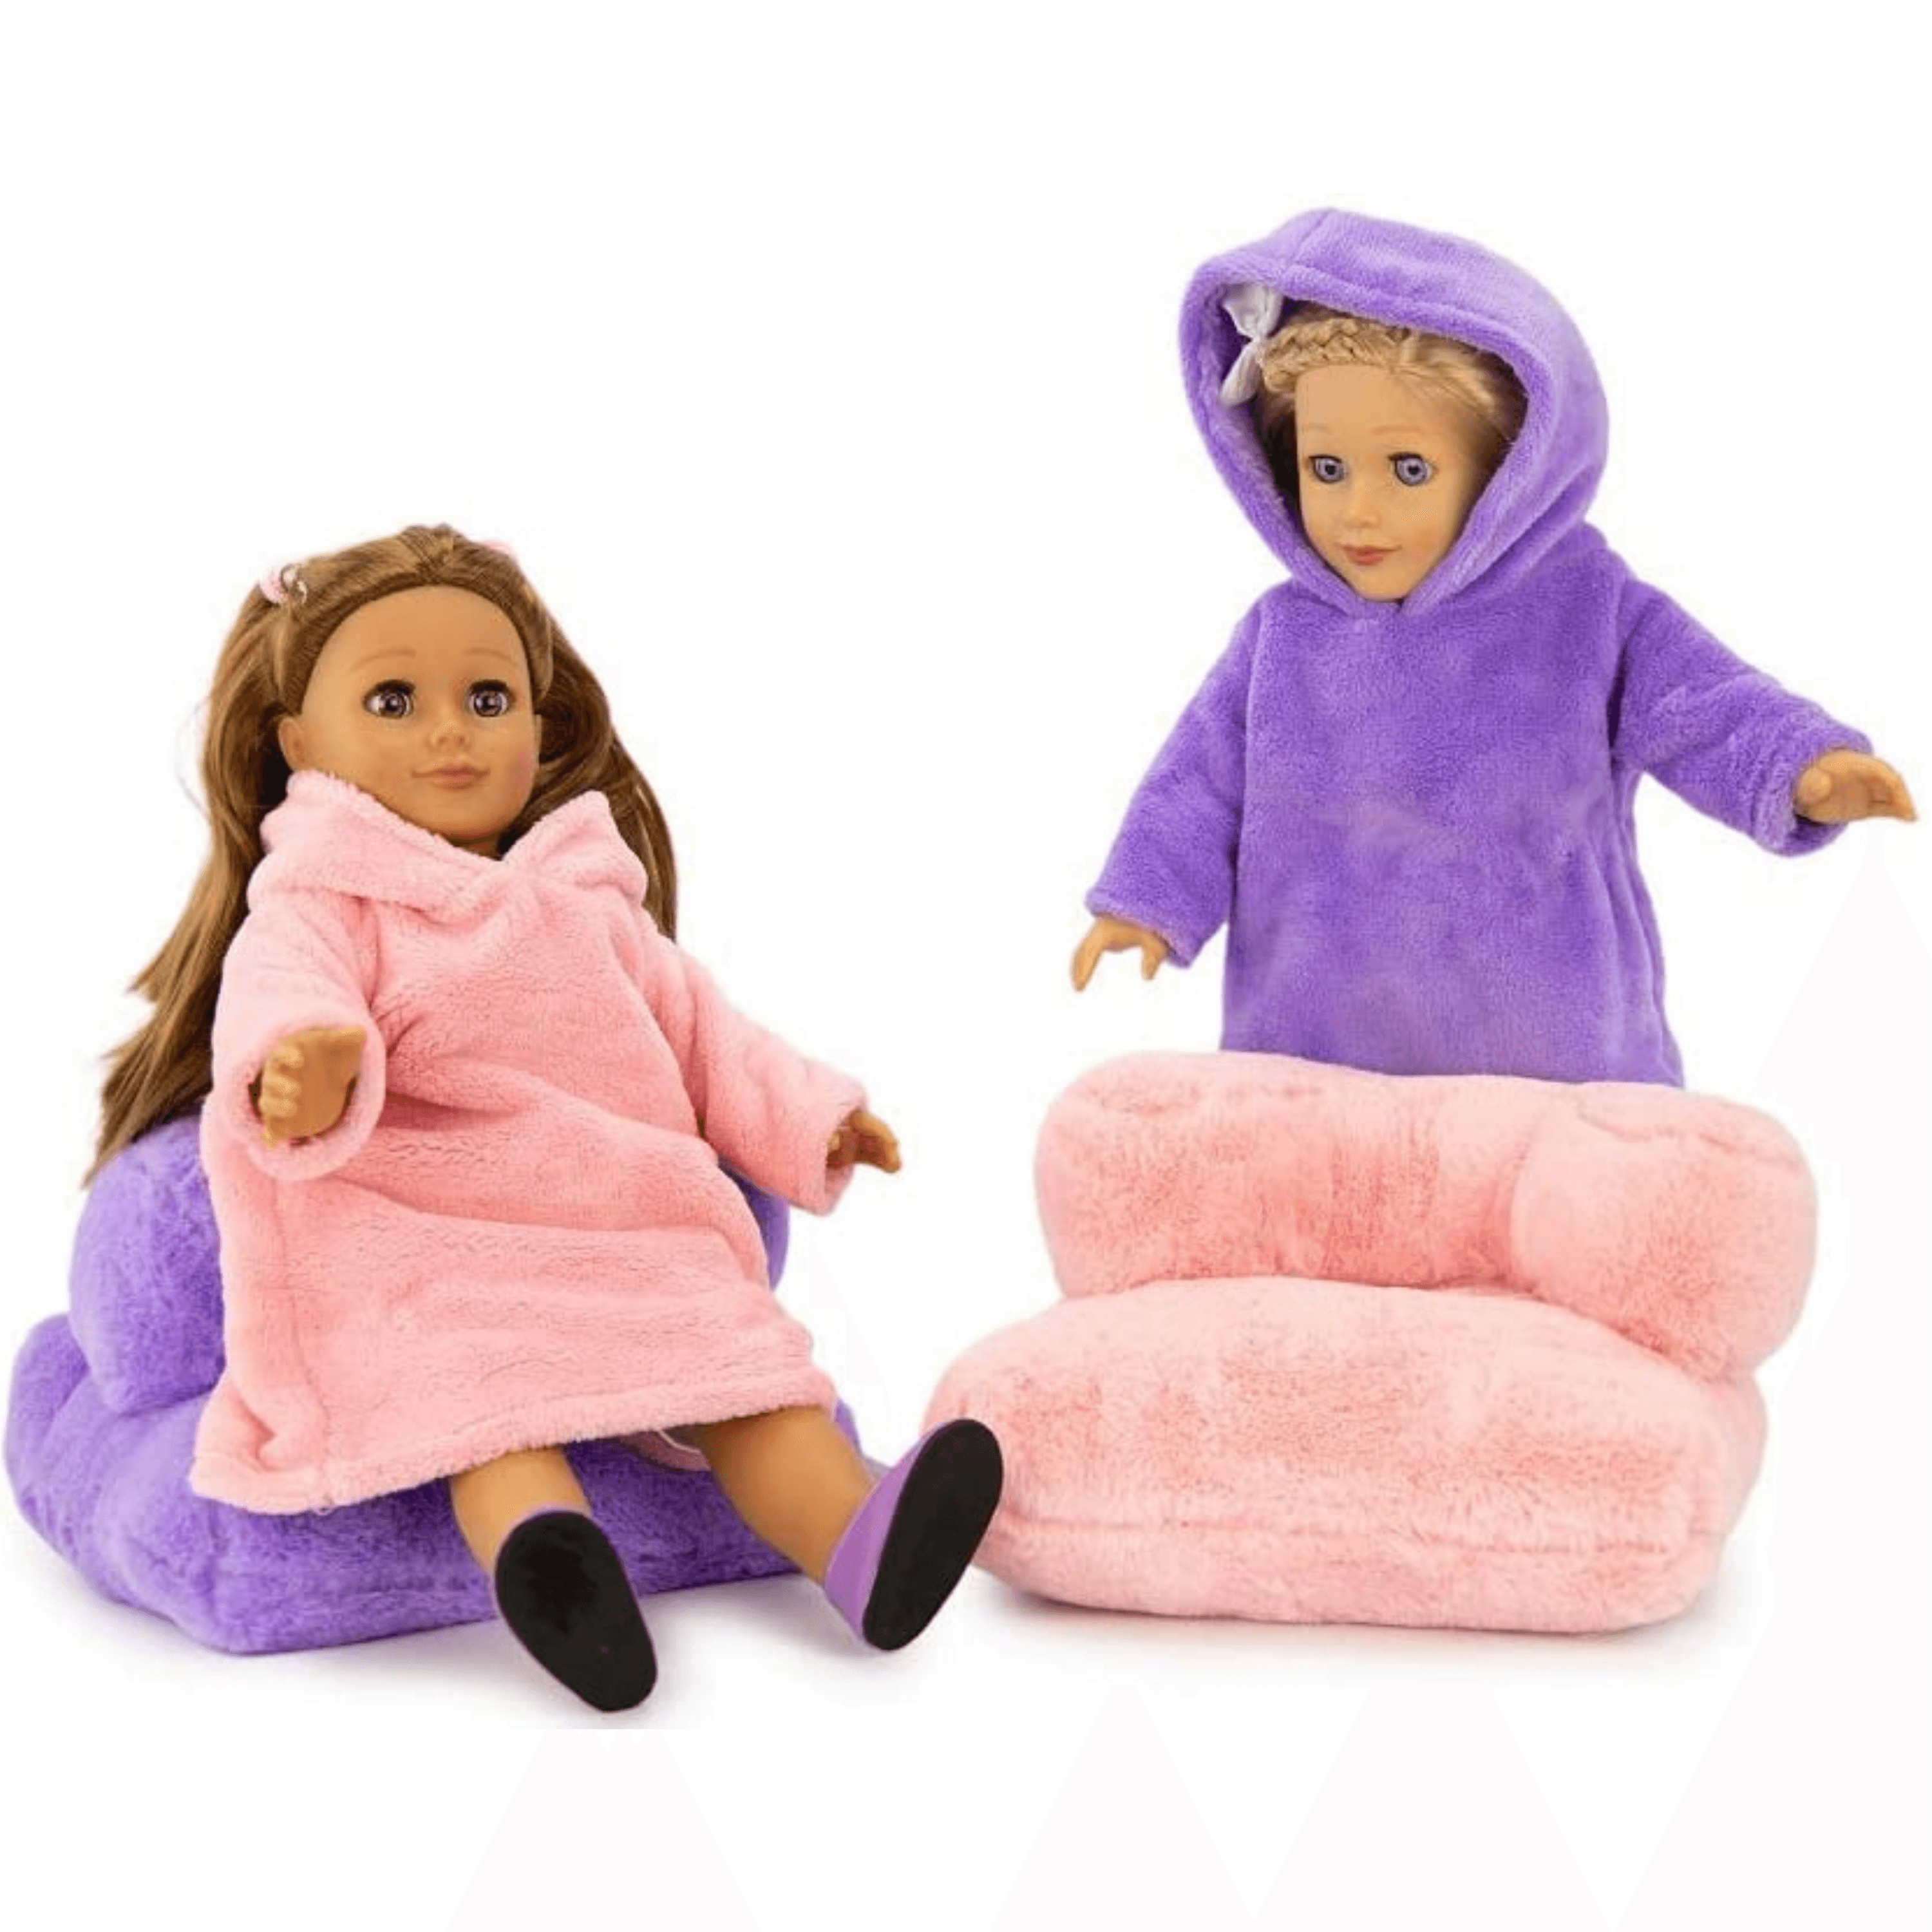 Playtime by Eimmie Playtime Pack Plush Chair Sleepover 18 Inch Dolls - OrangeOnions Wholesale